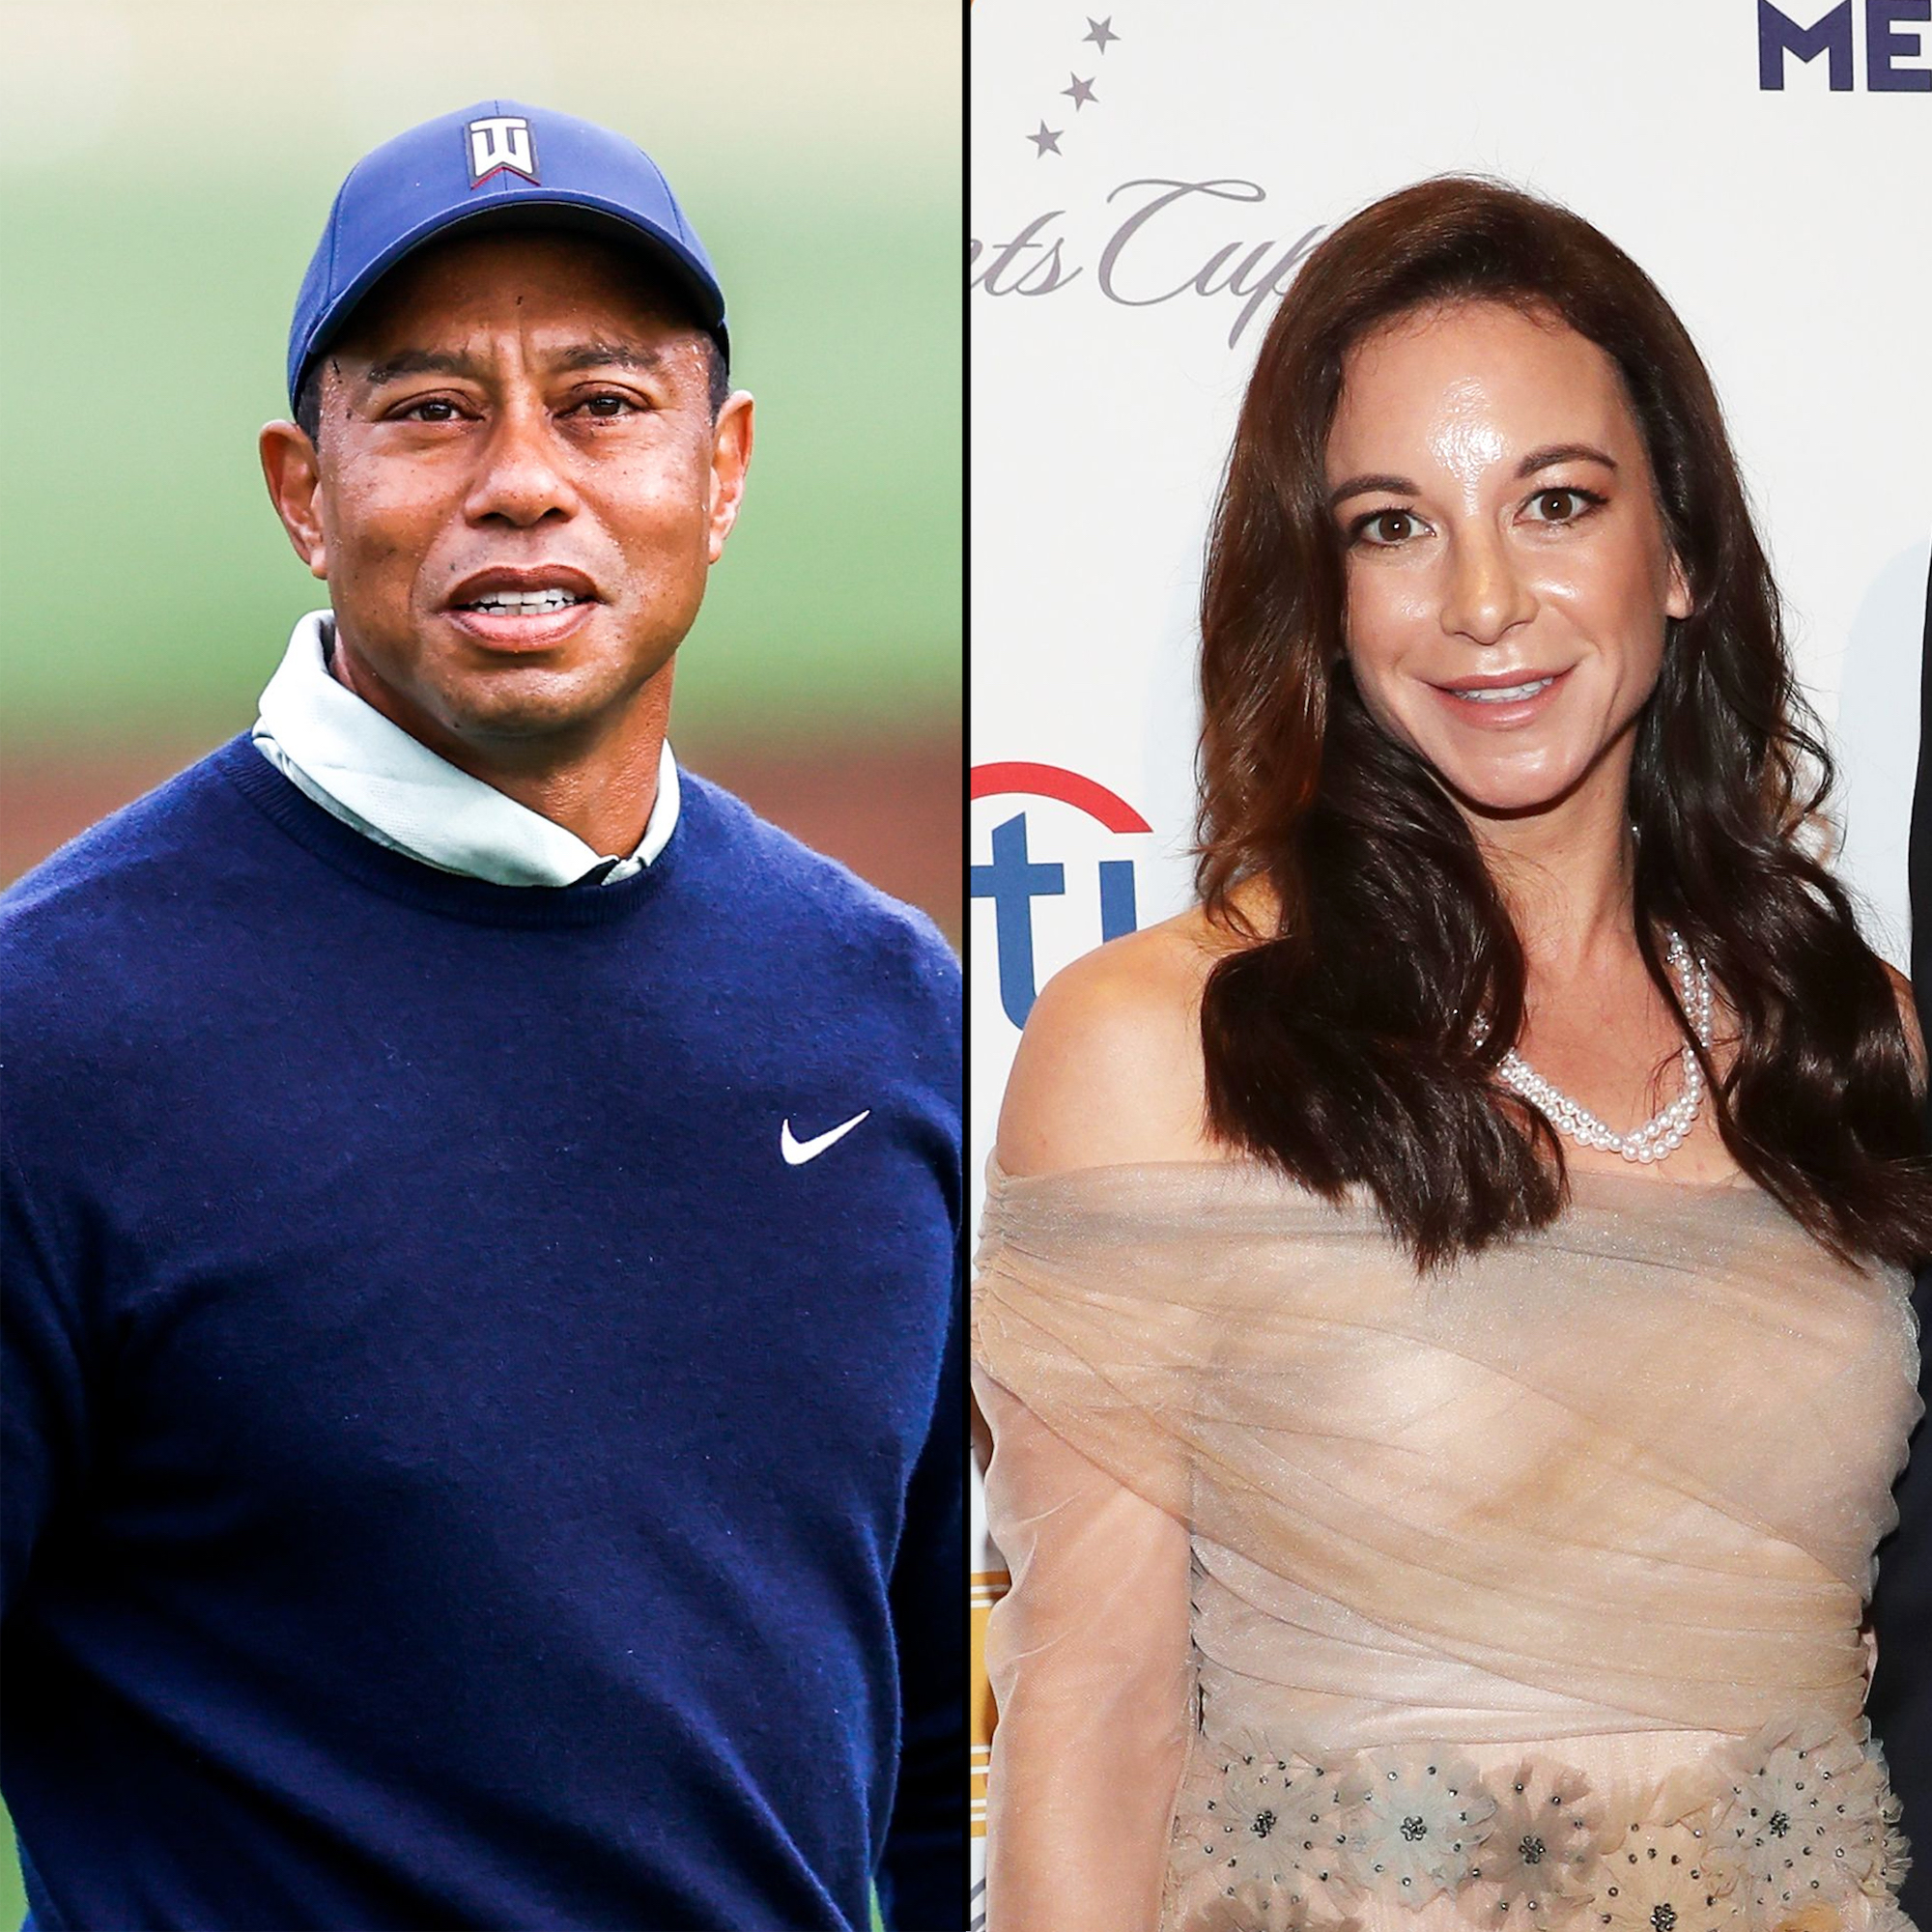 Tiger Woods Ex Erica Herman Accuses Him of Sexual Harassment pic